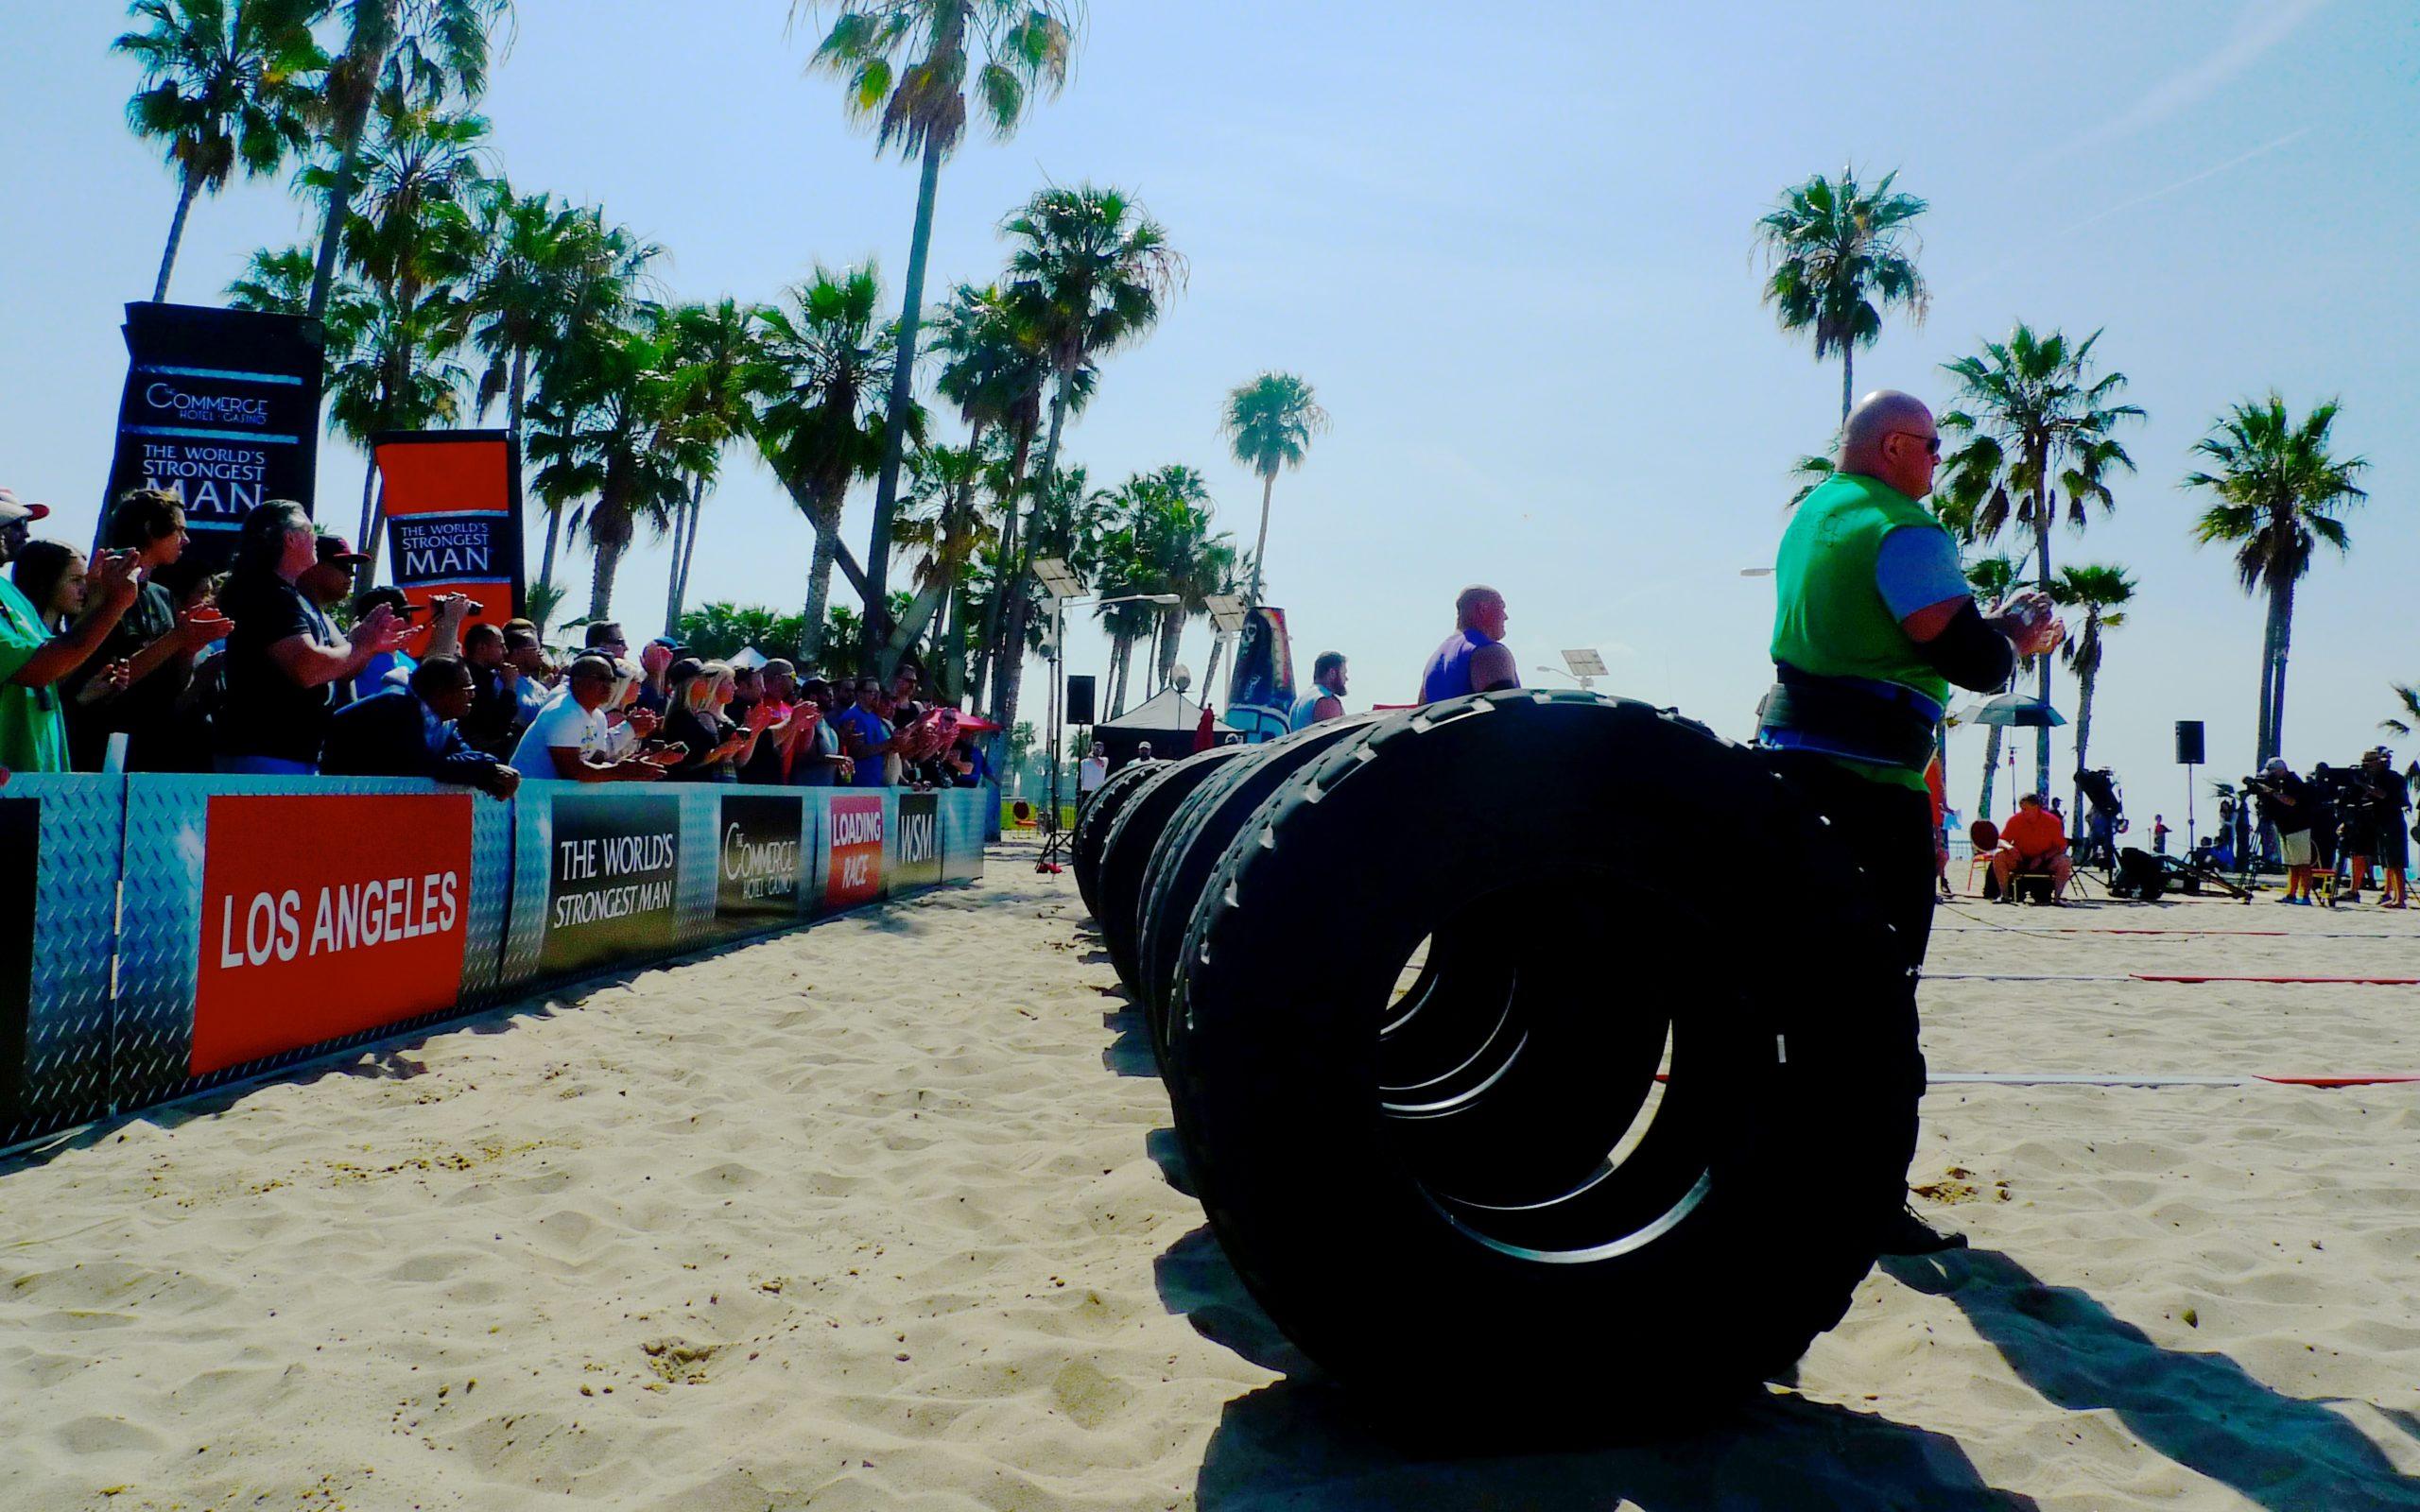 Fitmodo: A Day At Muscle Beach With The World’s Strongest Man